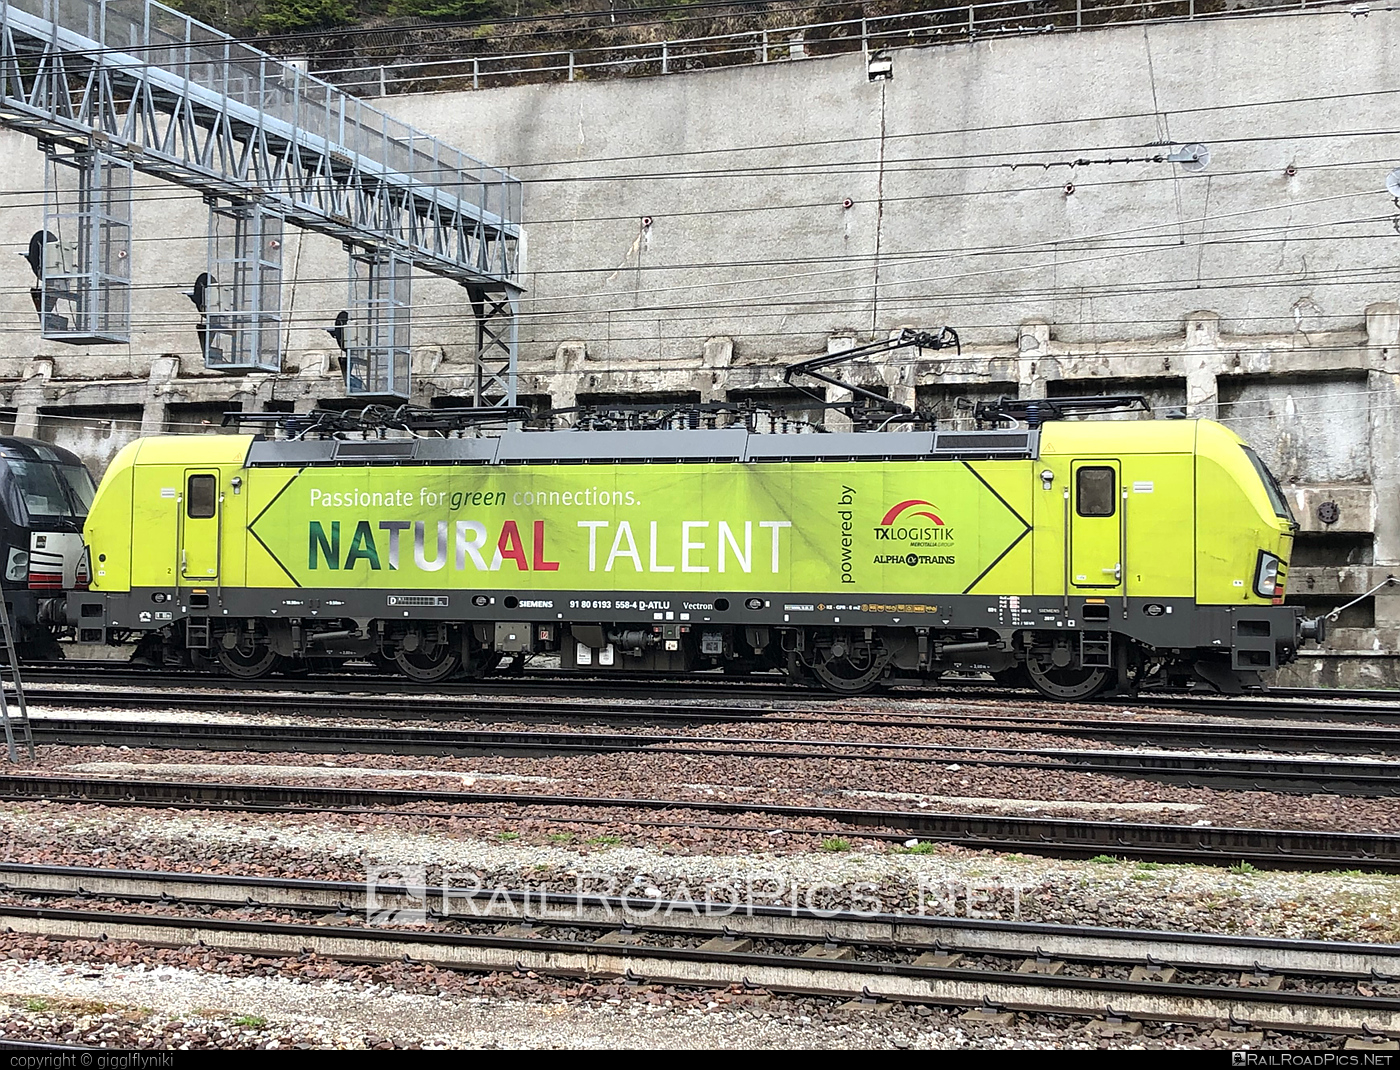 Siemens Vectron MS - 193 558 operated by TXLogistik #alphatrainsluxembourg #siemens #siemensvectron #siemensvectronms #txlogistik #vectron #vectronms